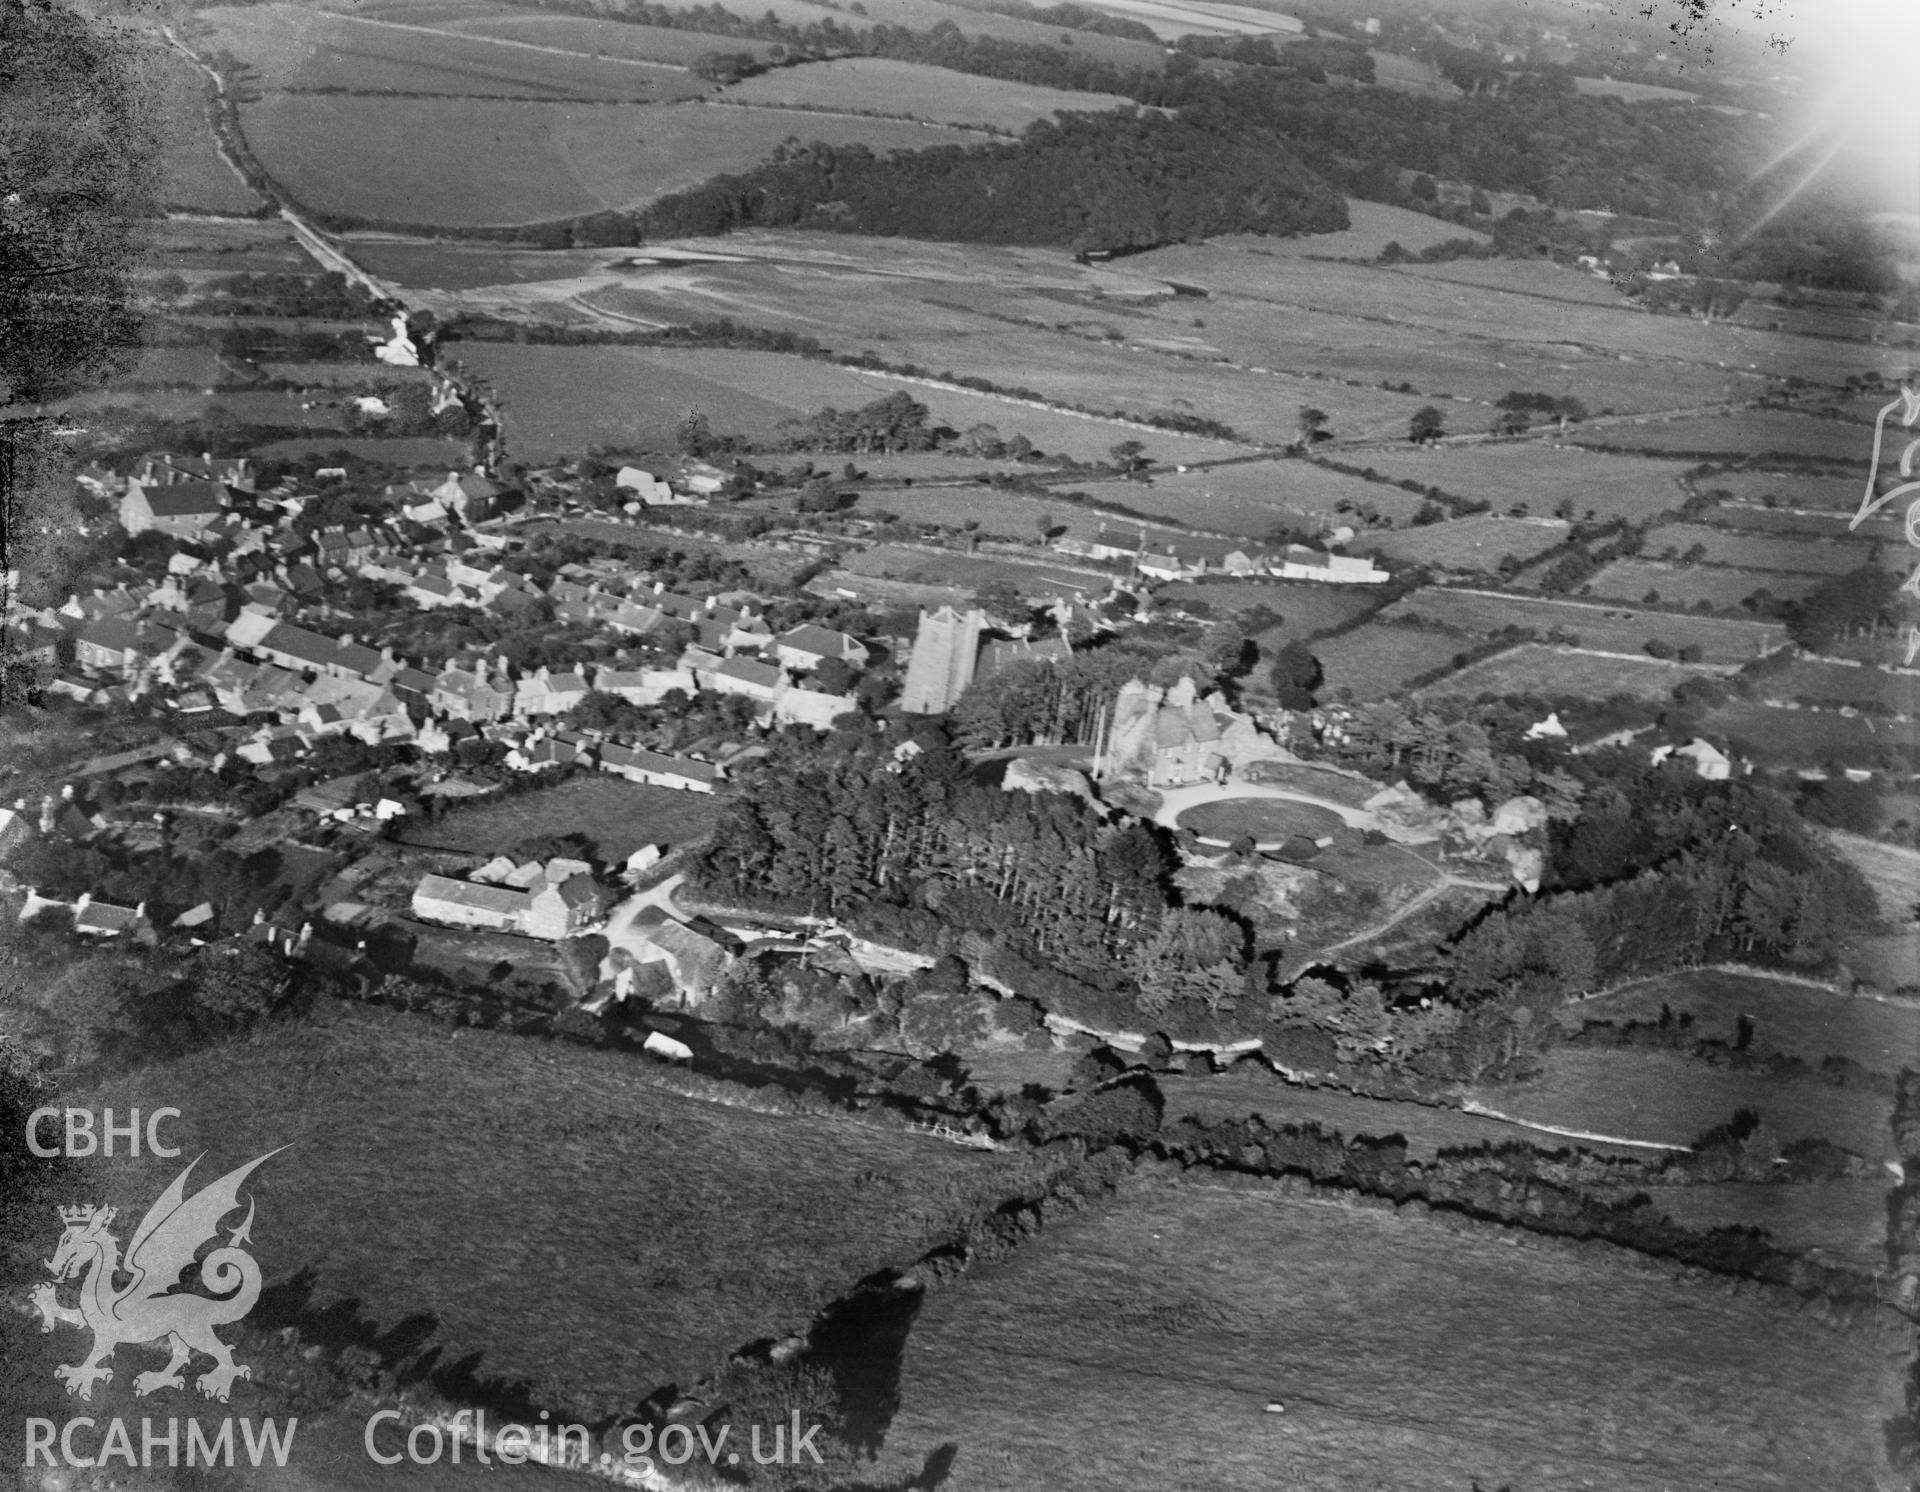 View of Newport, Pembrokeshire, showing castle, oblique aerial view. 5?x4? black and white glass plate negative.